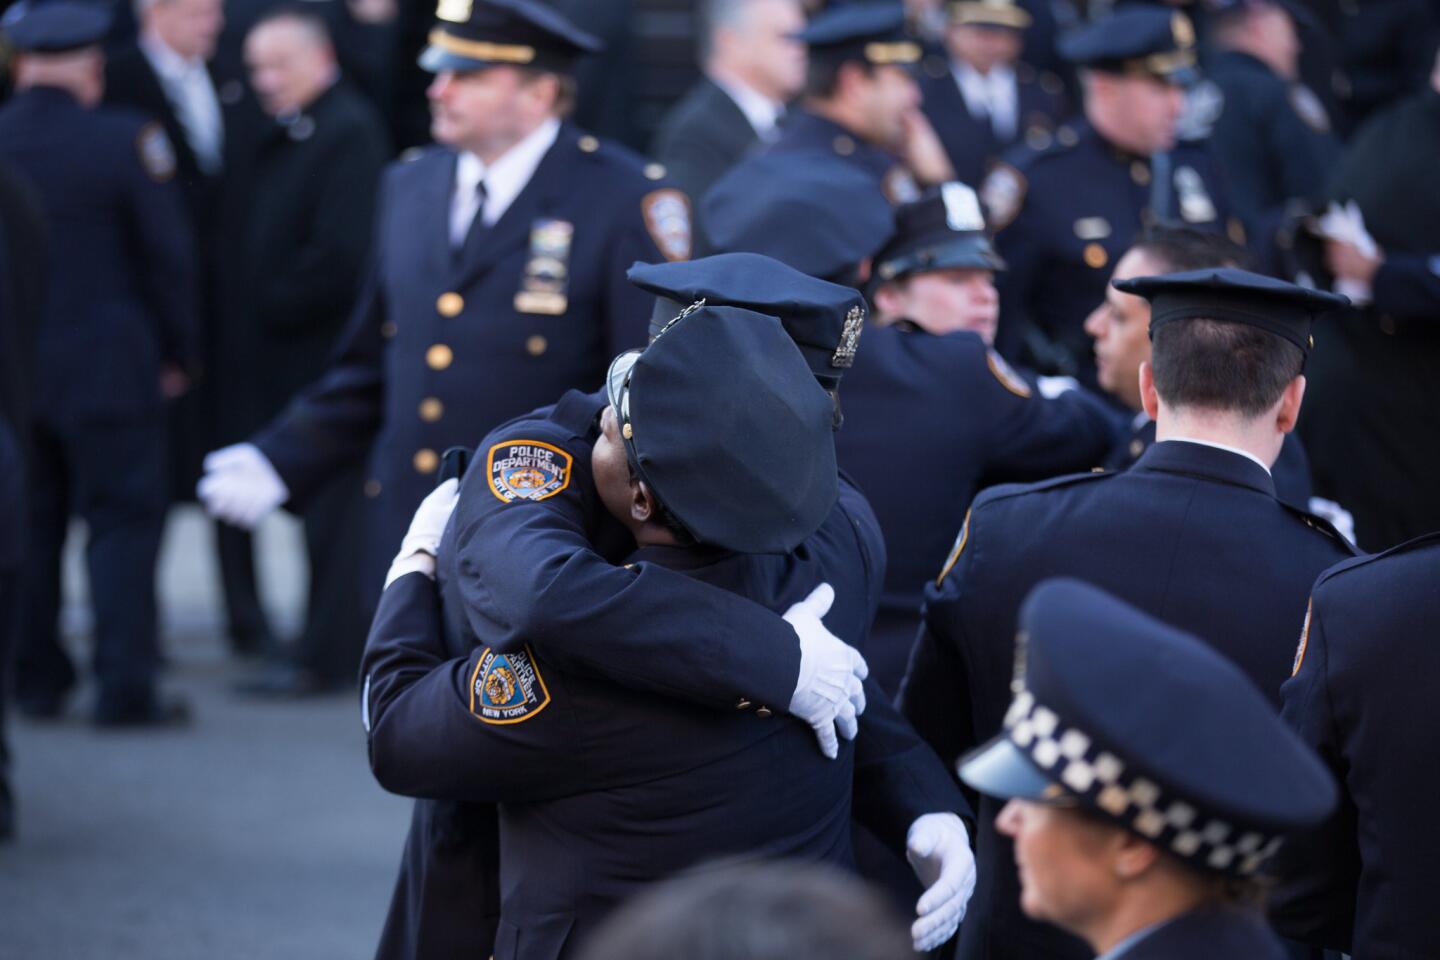 NYPD Officer Rafael Ramos' funeral